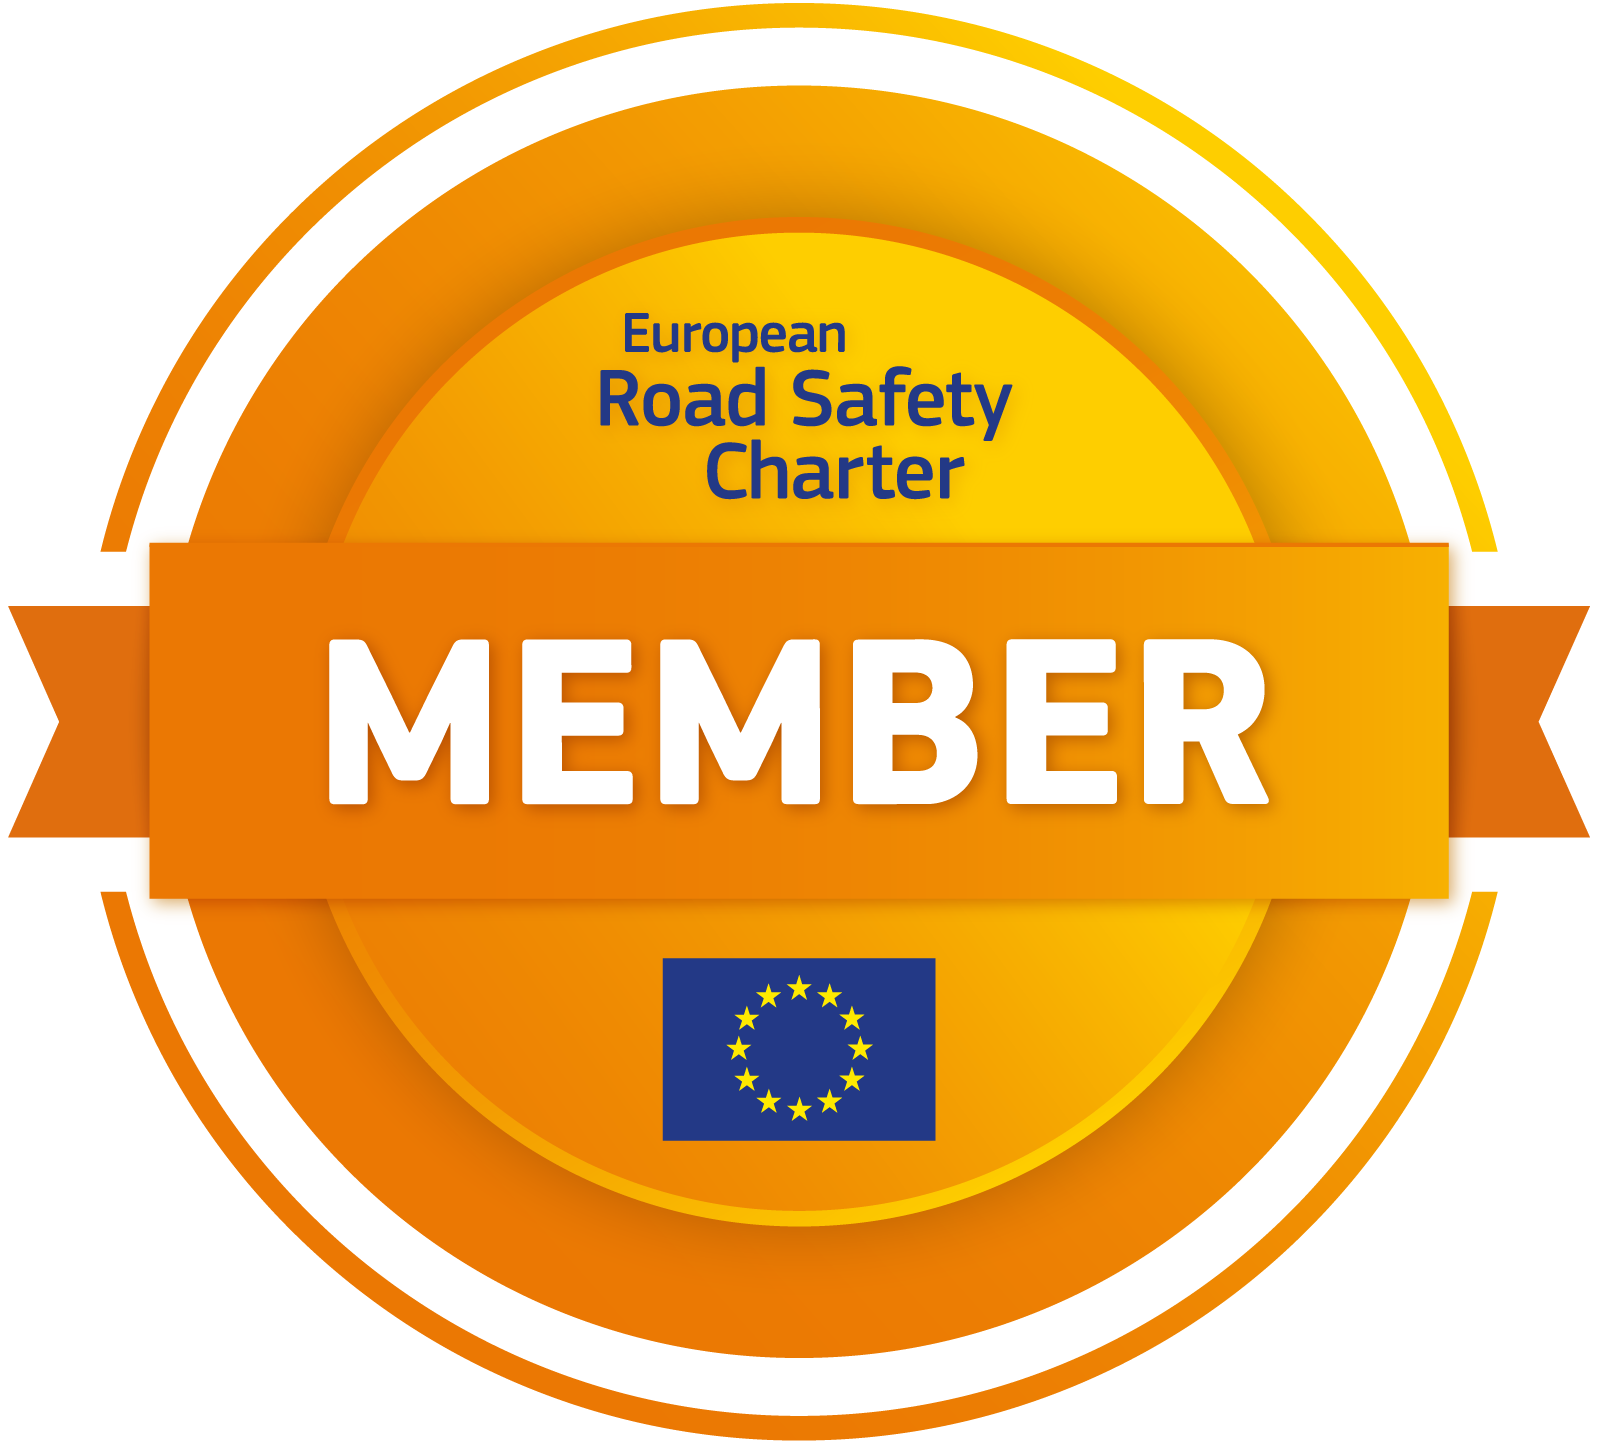 European Road Safety Charter Member